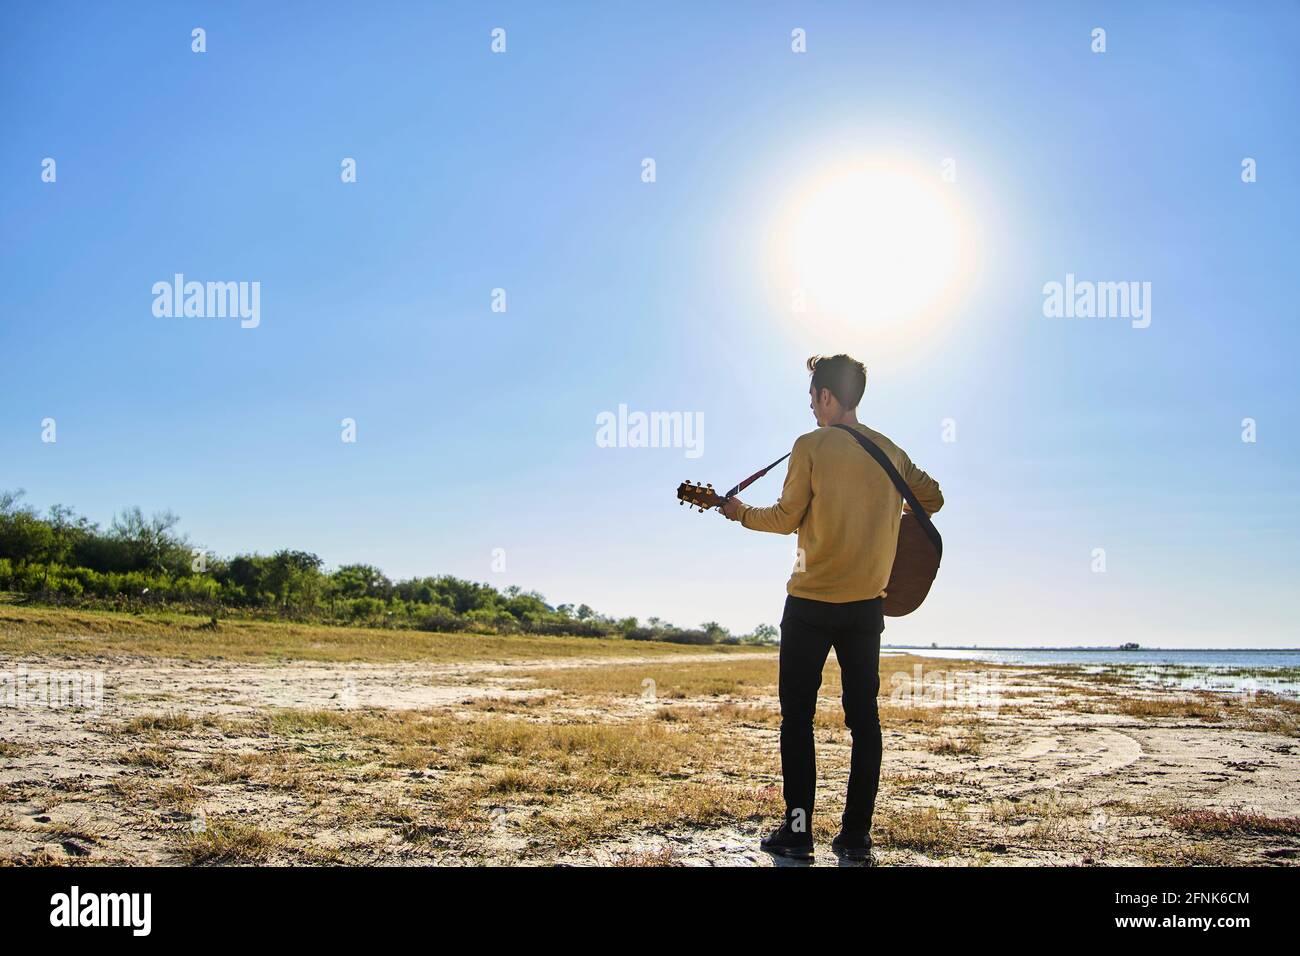 young man playing guitar in wild pl Stock Photo